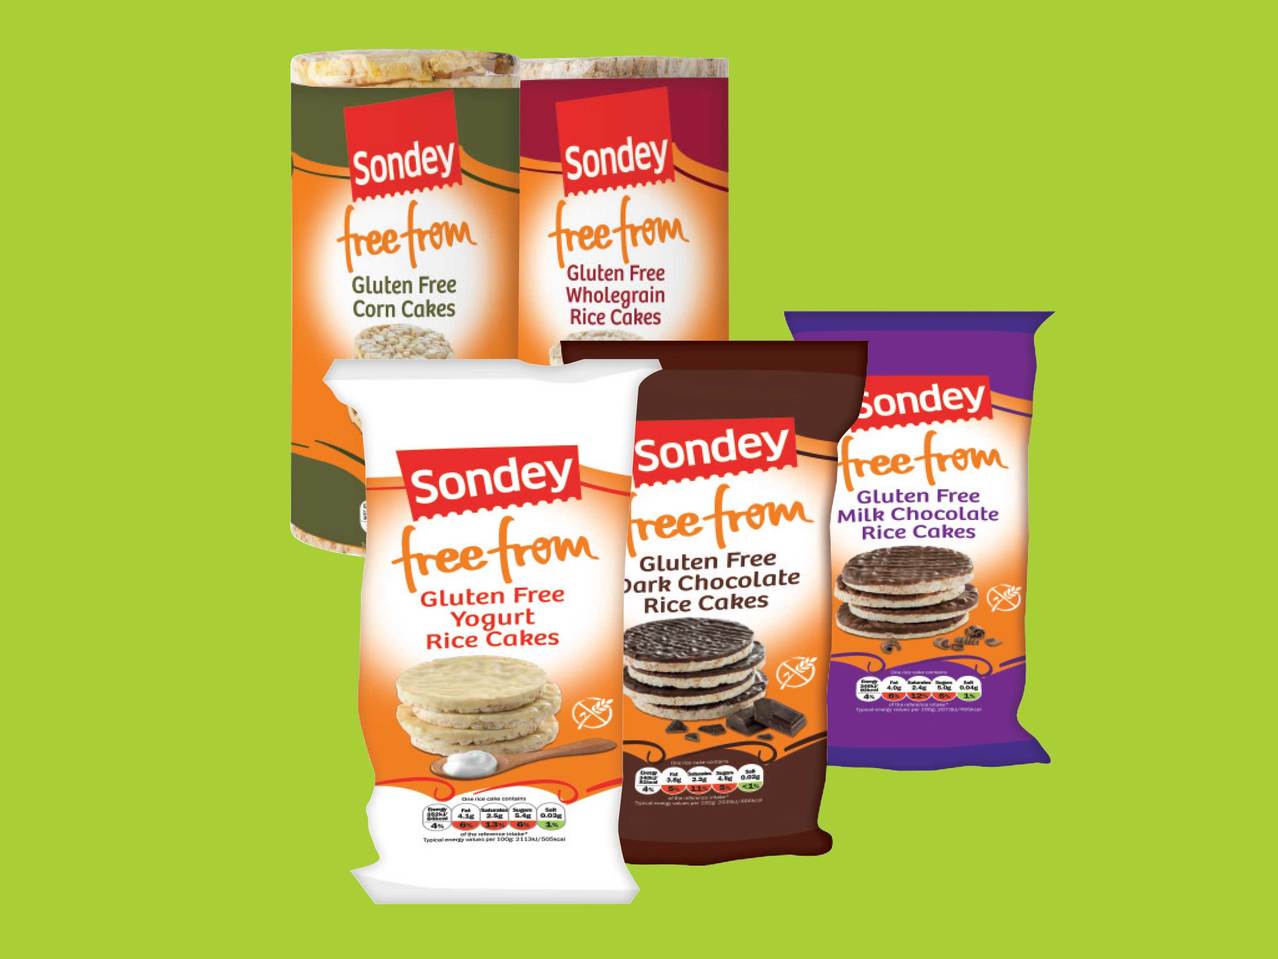 SONDEY FREE FROM(R) Gluten Free Coated/ Unsalted Rice Cakes/ Corn Cakes